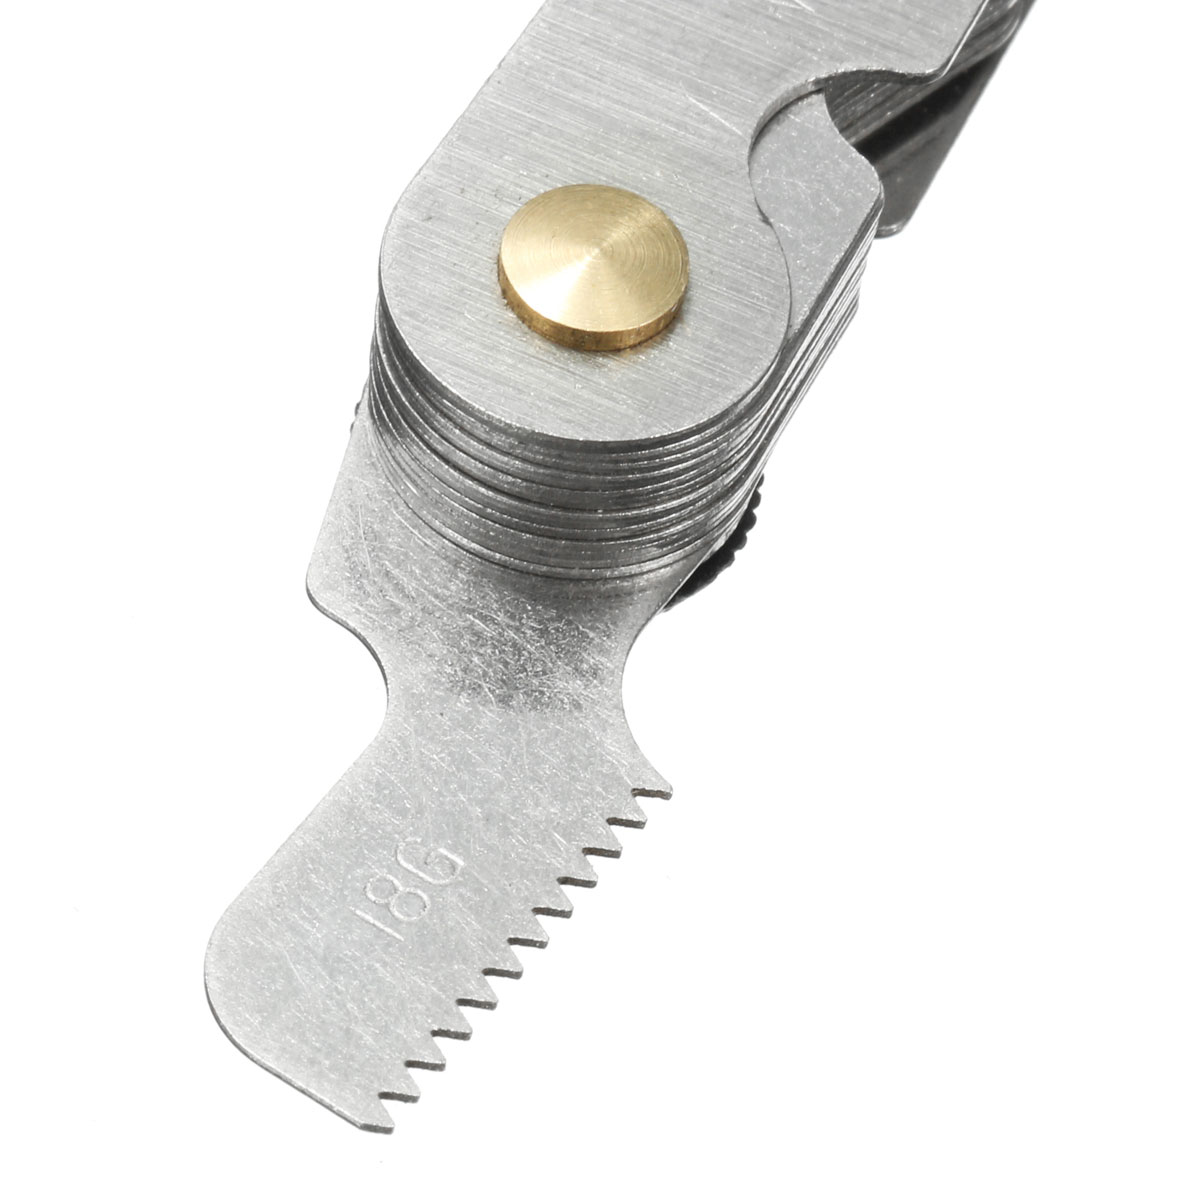 Metric-Whitworth-5560-Degree-Thread-Screw-Pitch-Gauge-With-3x-Centre-Gages-1092555-9